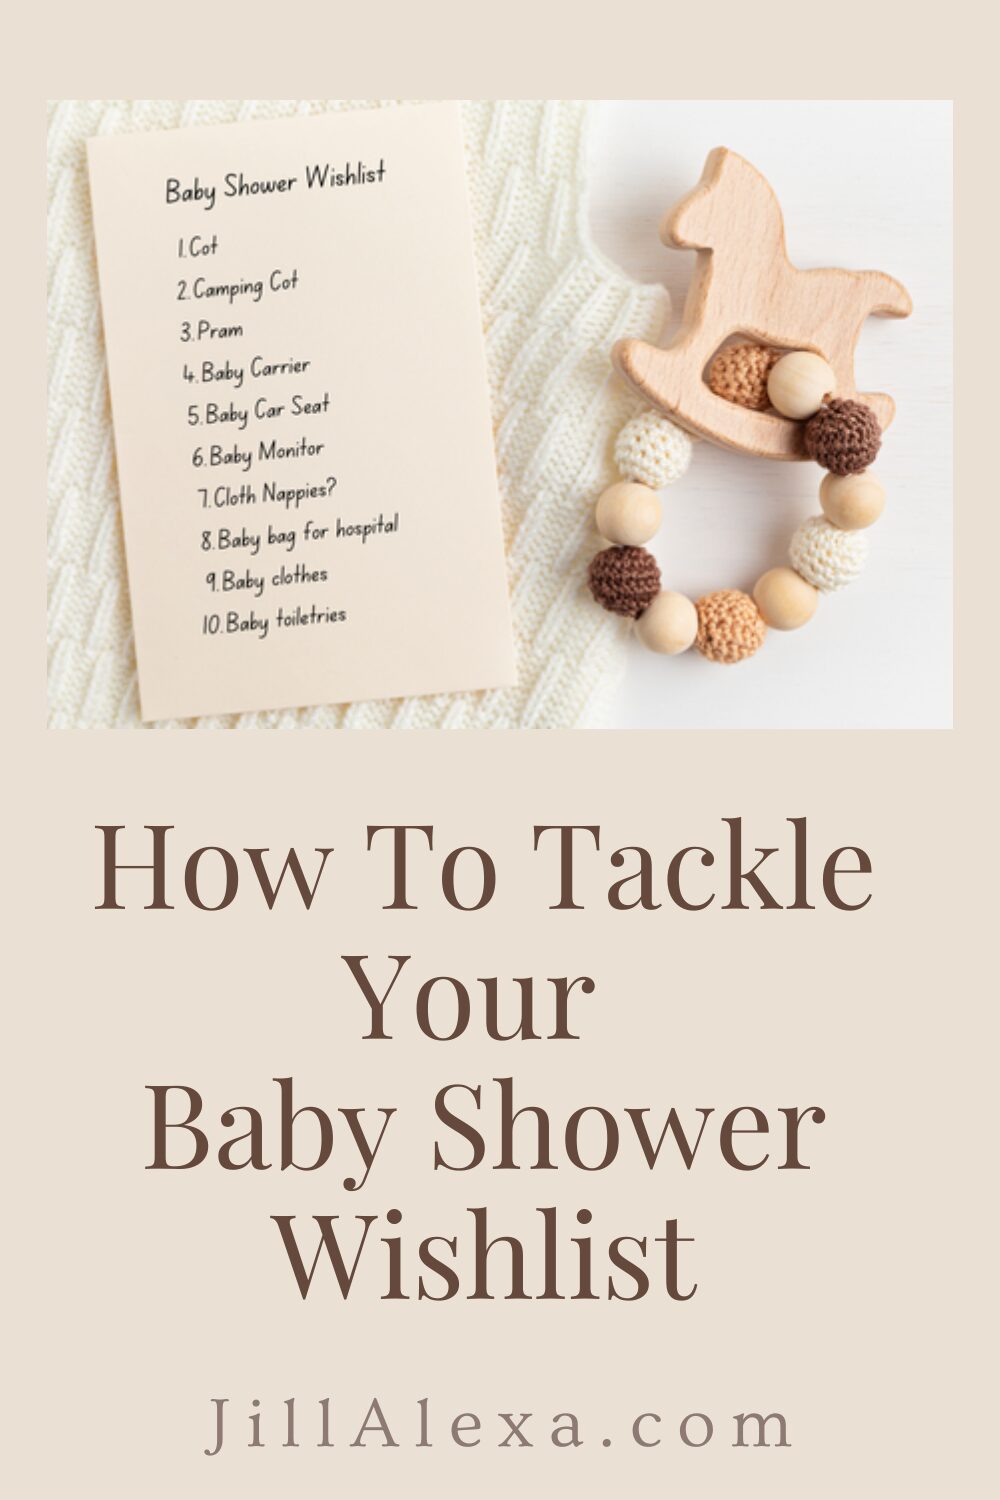 Will you be welcoming a newborn into your family soon? Feeling a bit overwhelmed? Here are 7 awesome tips to help you tackle your baby shower wishlist.  #babyshowerwishlist